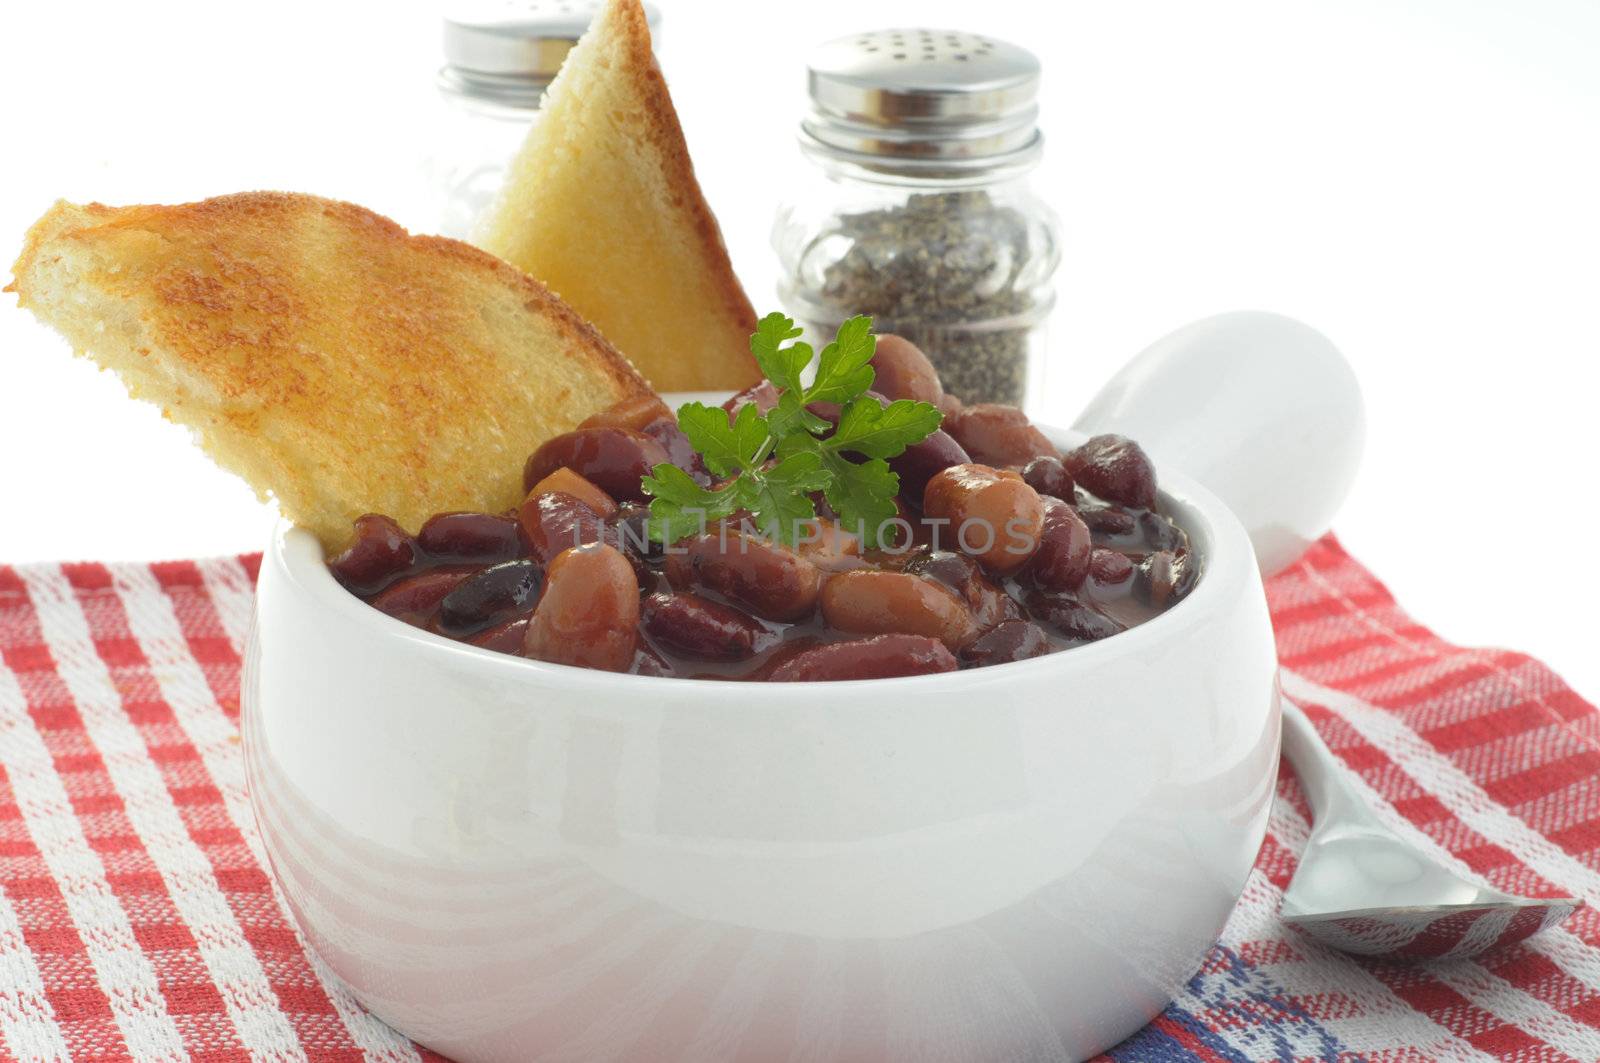 Bowl of baked beans served with toast.